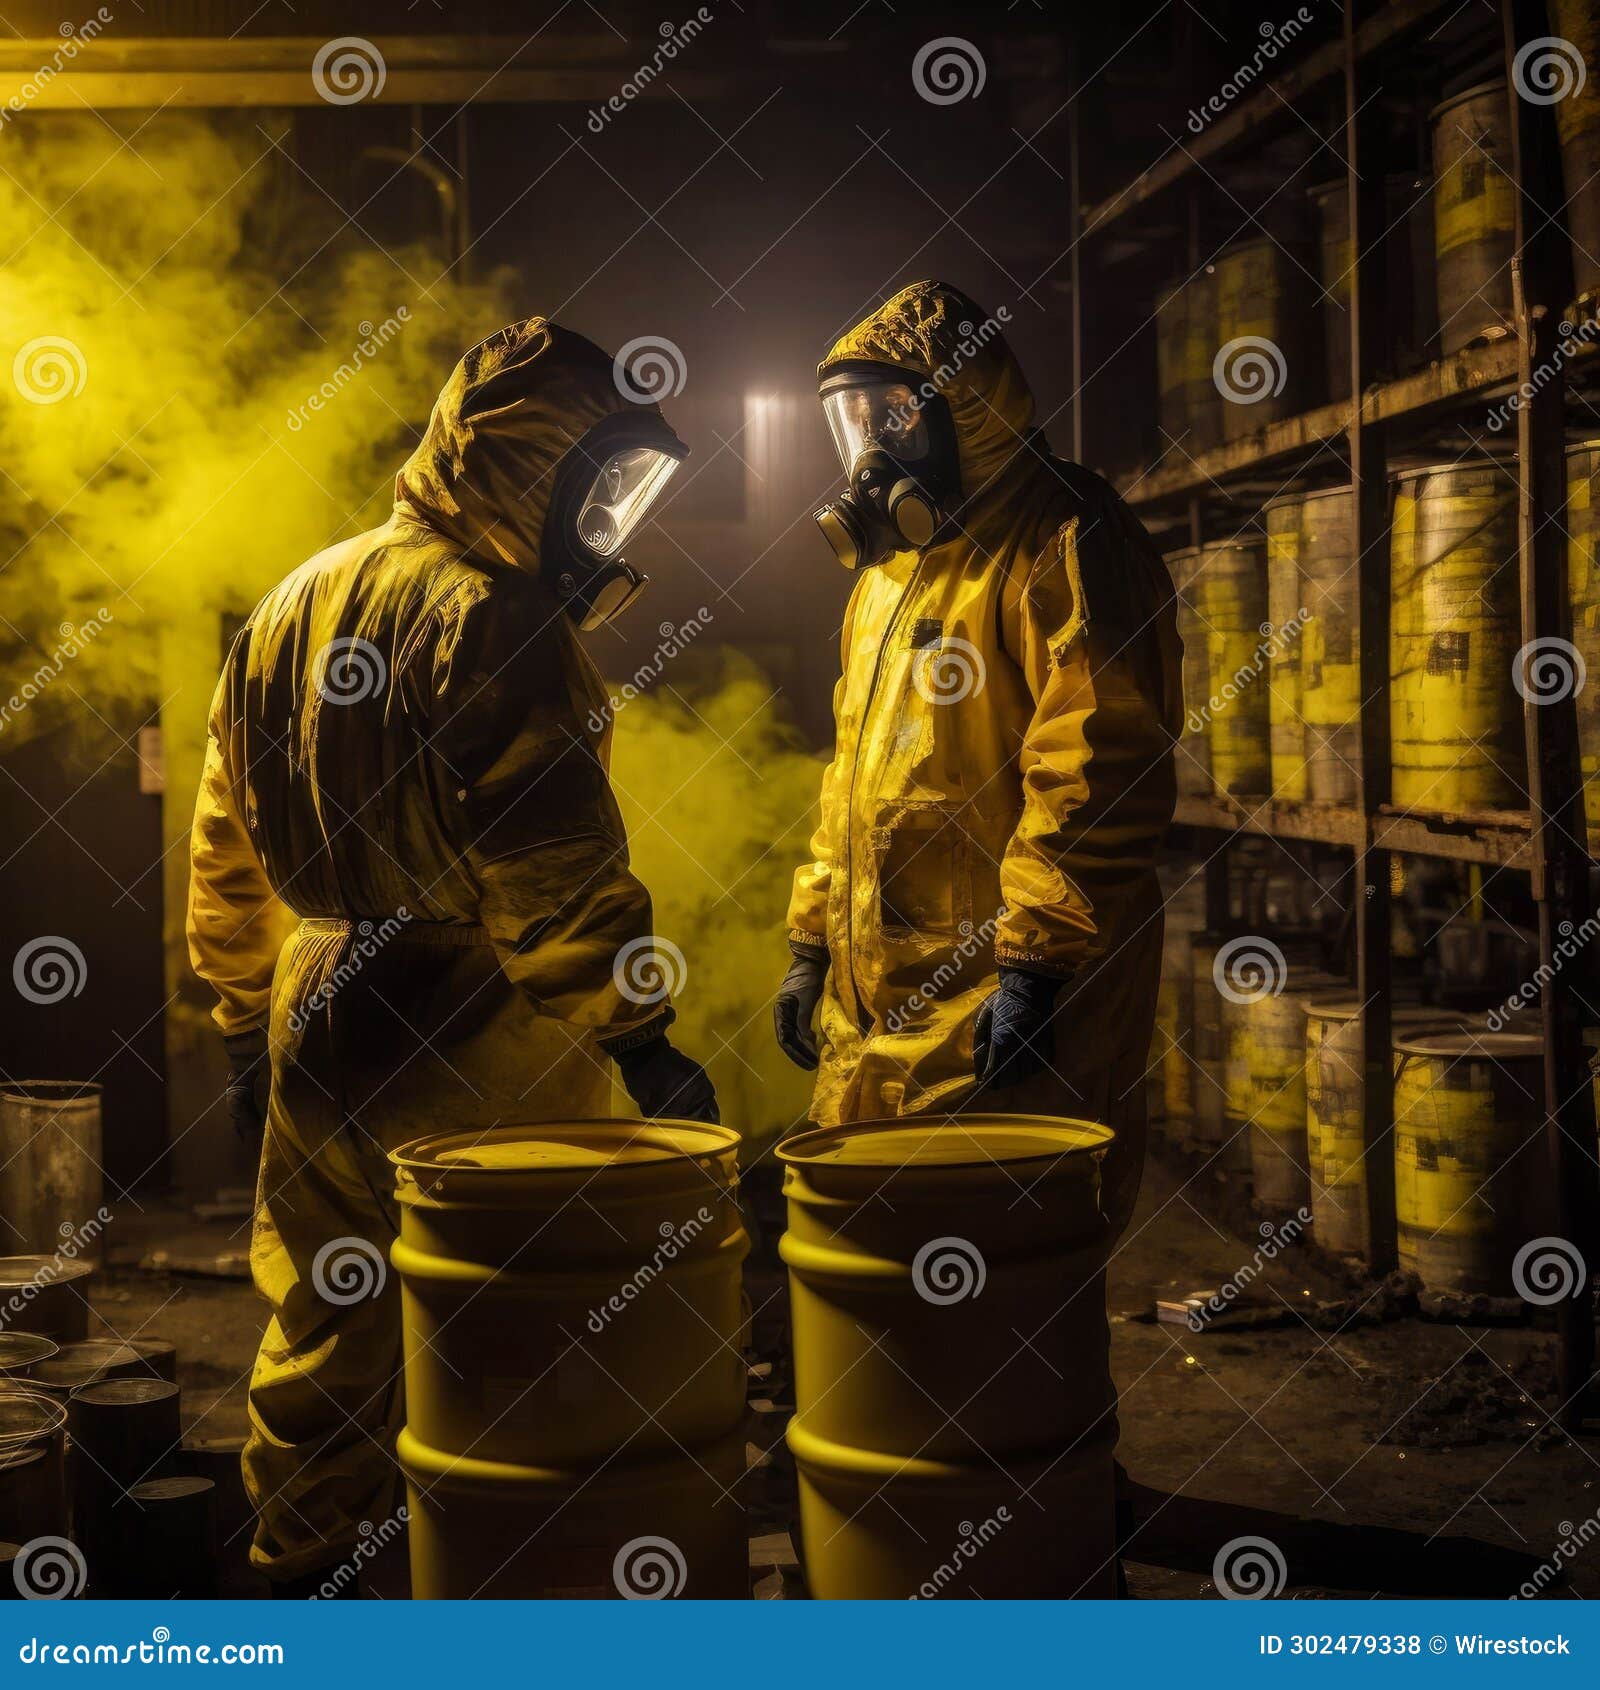 scientists - workers in chemical protective suits examine chemical barrels in an old warehouse - dep